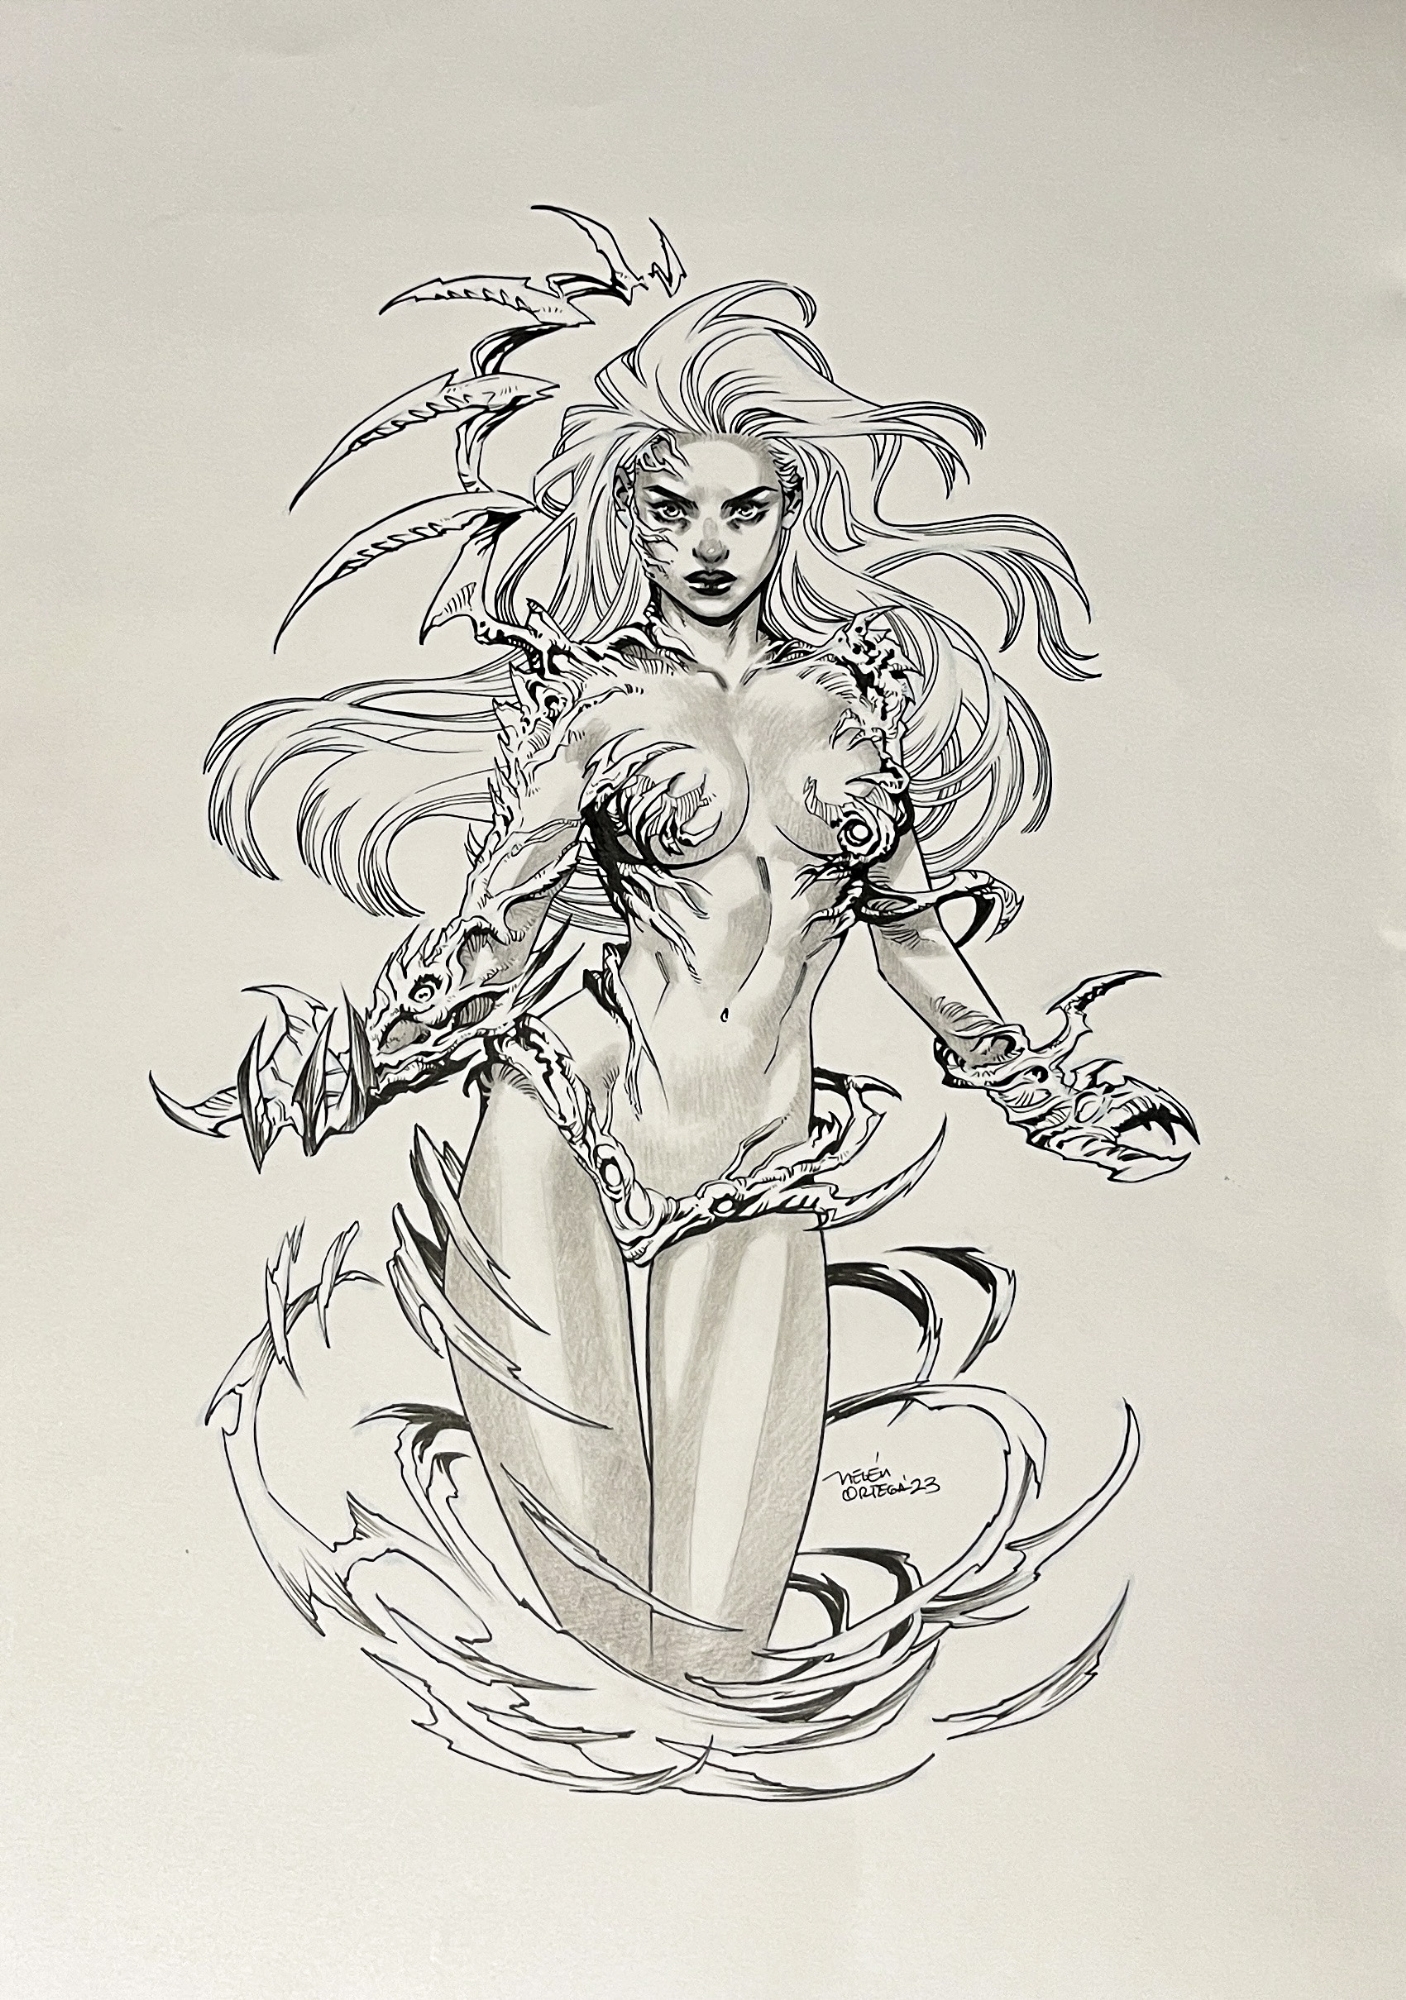 Witchblade halfbody commission by Belen Ortega Comic Art